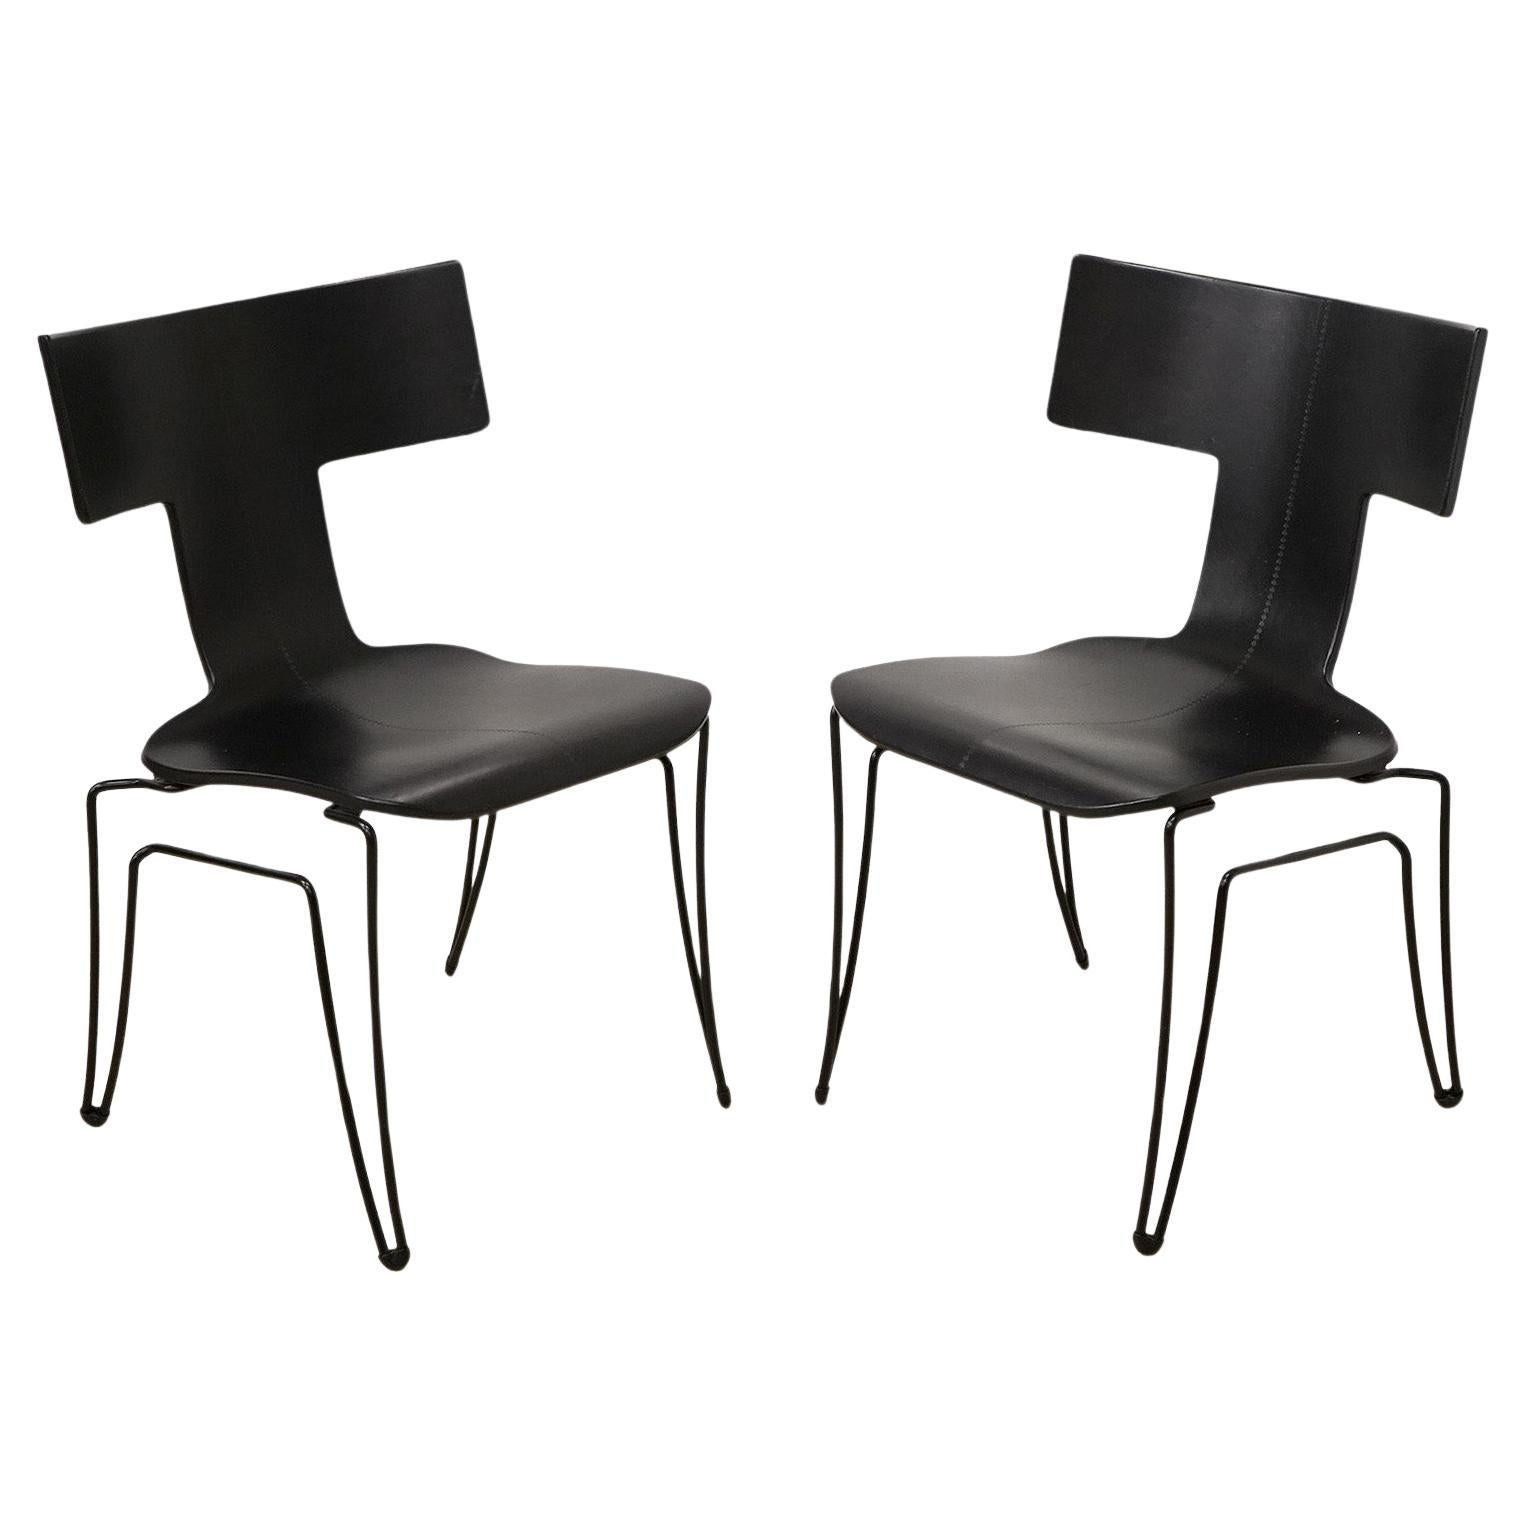 Pair 'Anziano Klismos' Dining Chairs by John Hutton for Donghia in Black Leather